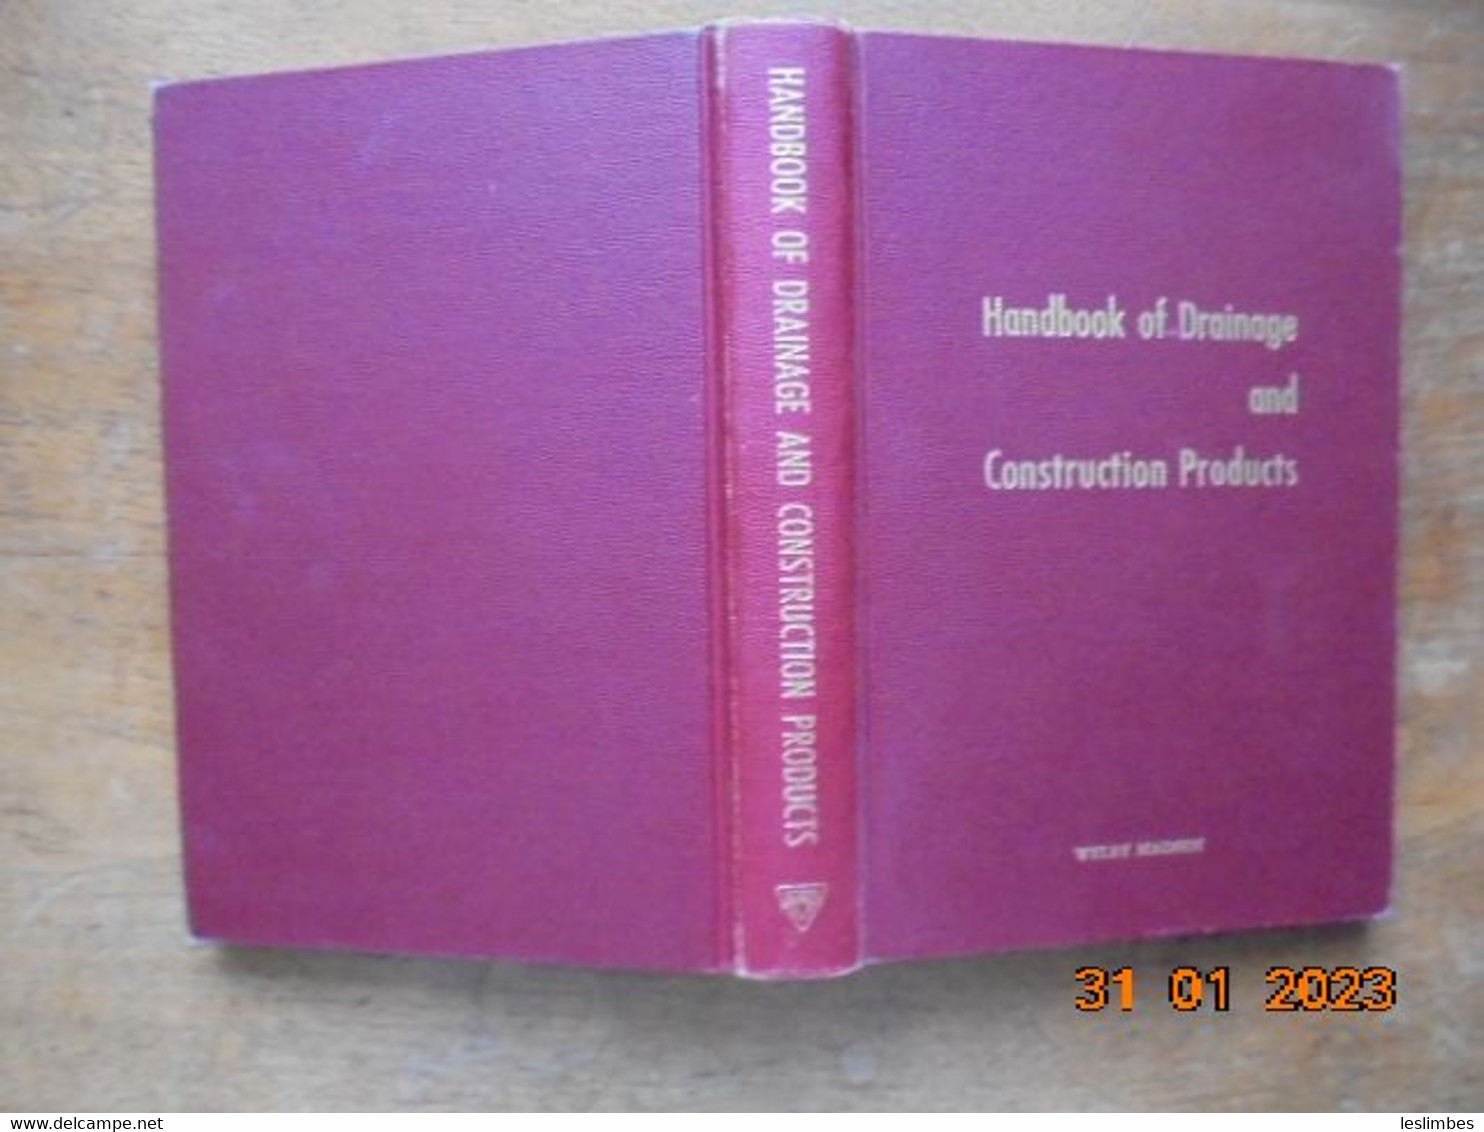 Handbook Of Drainage And Construction Products - Armco Drainage & Metal Products 1955 - Ingeniería